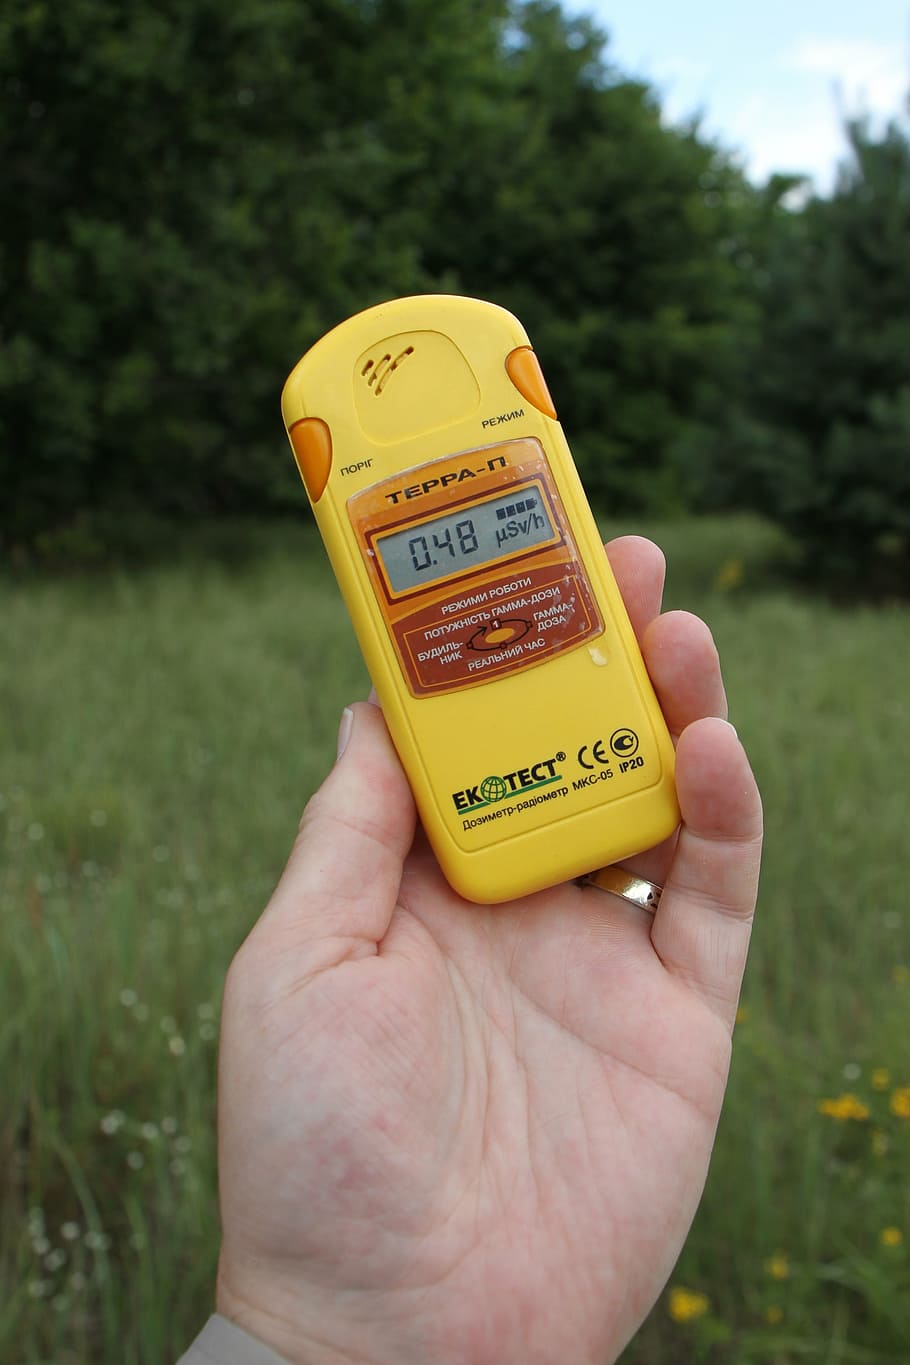 dosimeter, geiger counter, radiation, safety, radioactivity, protection, detector, human hand, hand, human body part